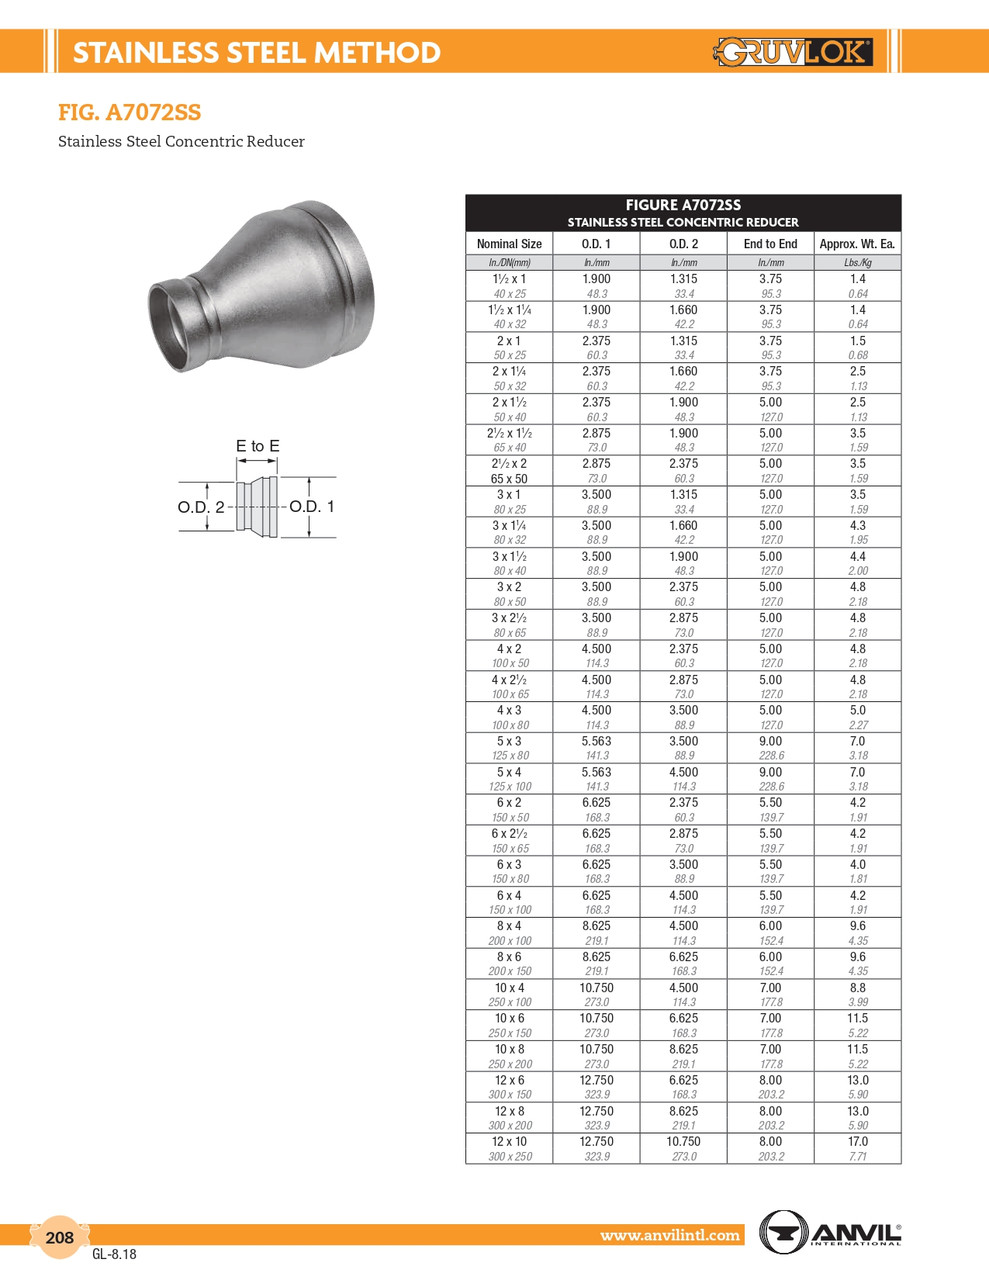 Fig. A7072SS Stainless Concentric Reducer 12 x 6"